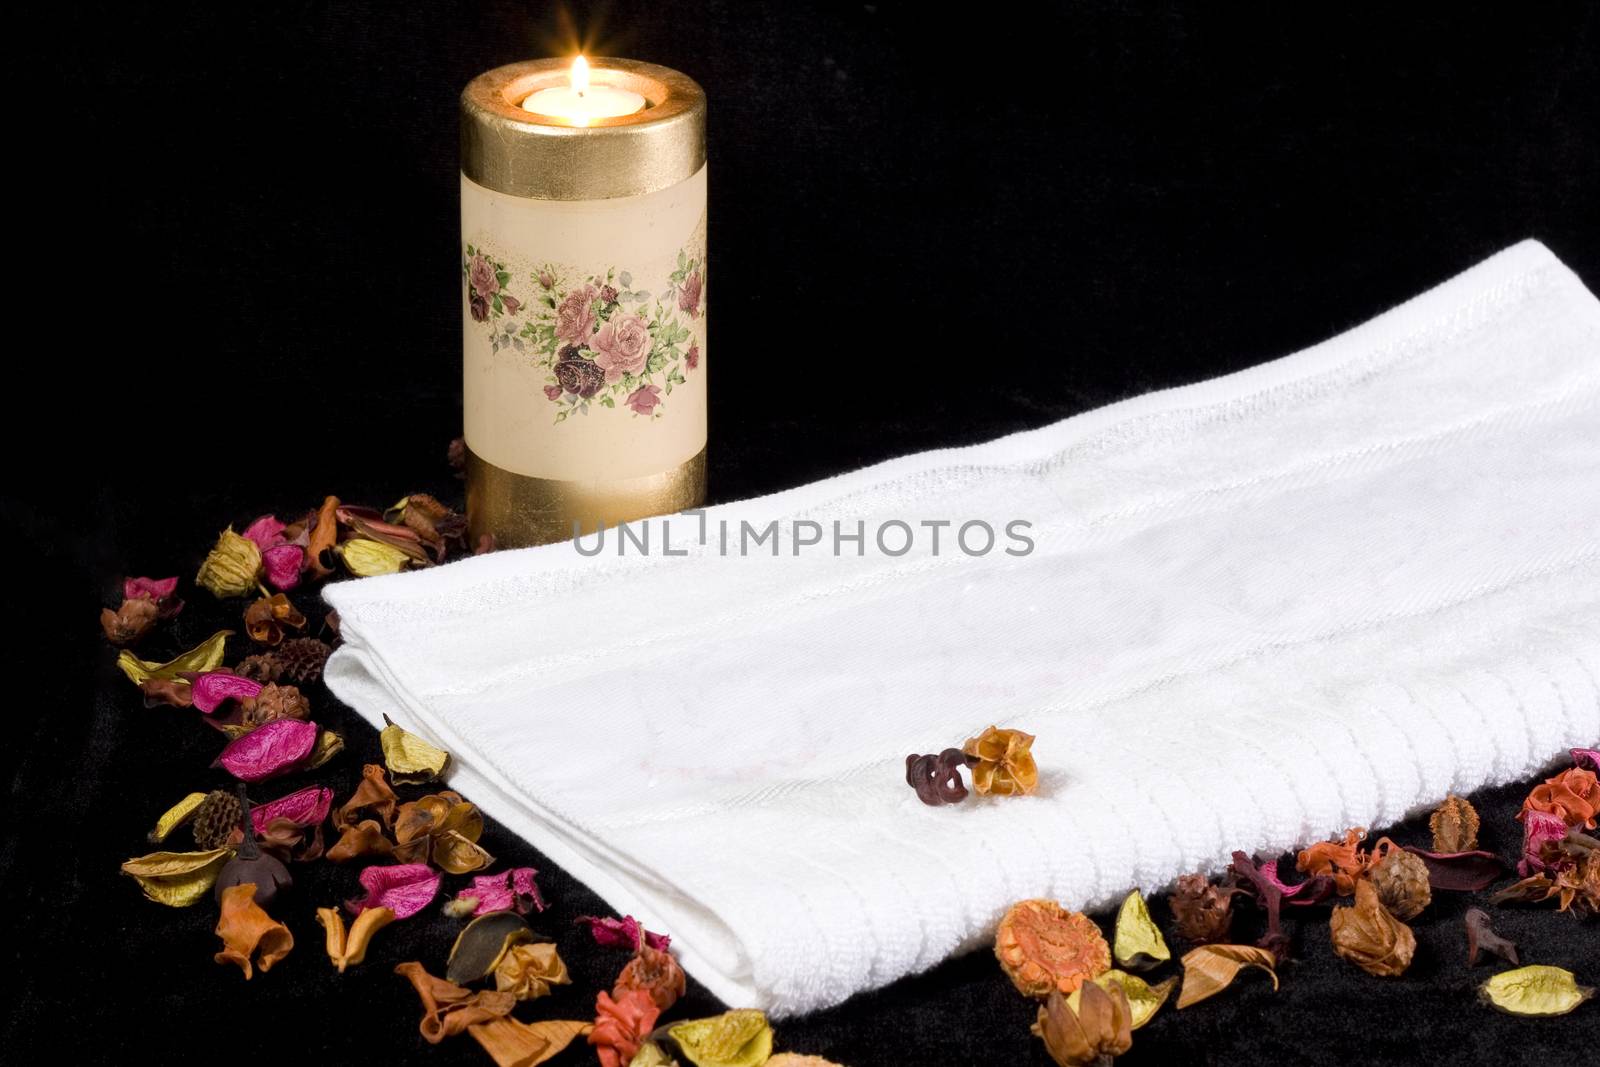 a white towel burning candle and dried flowers